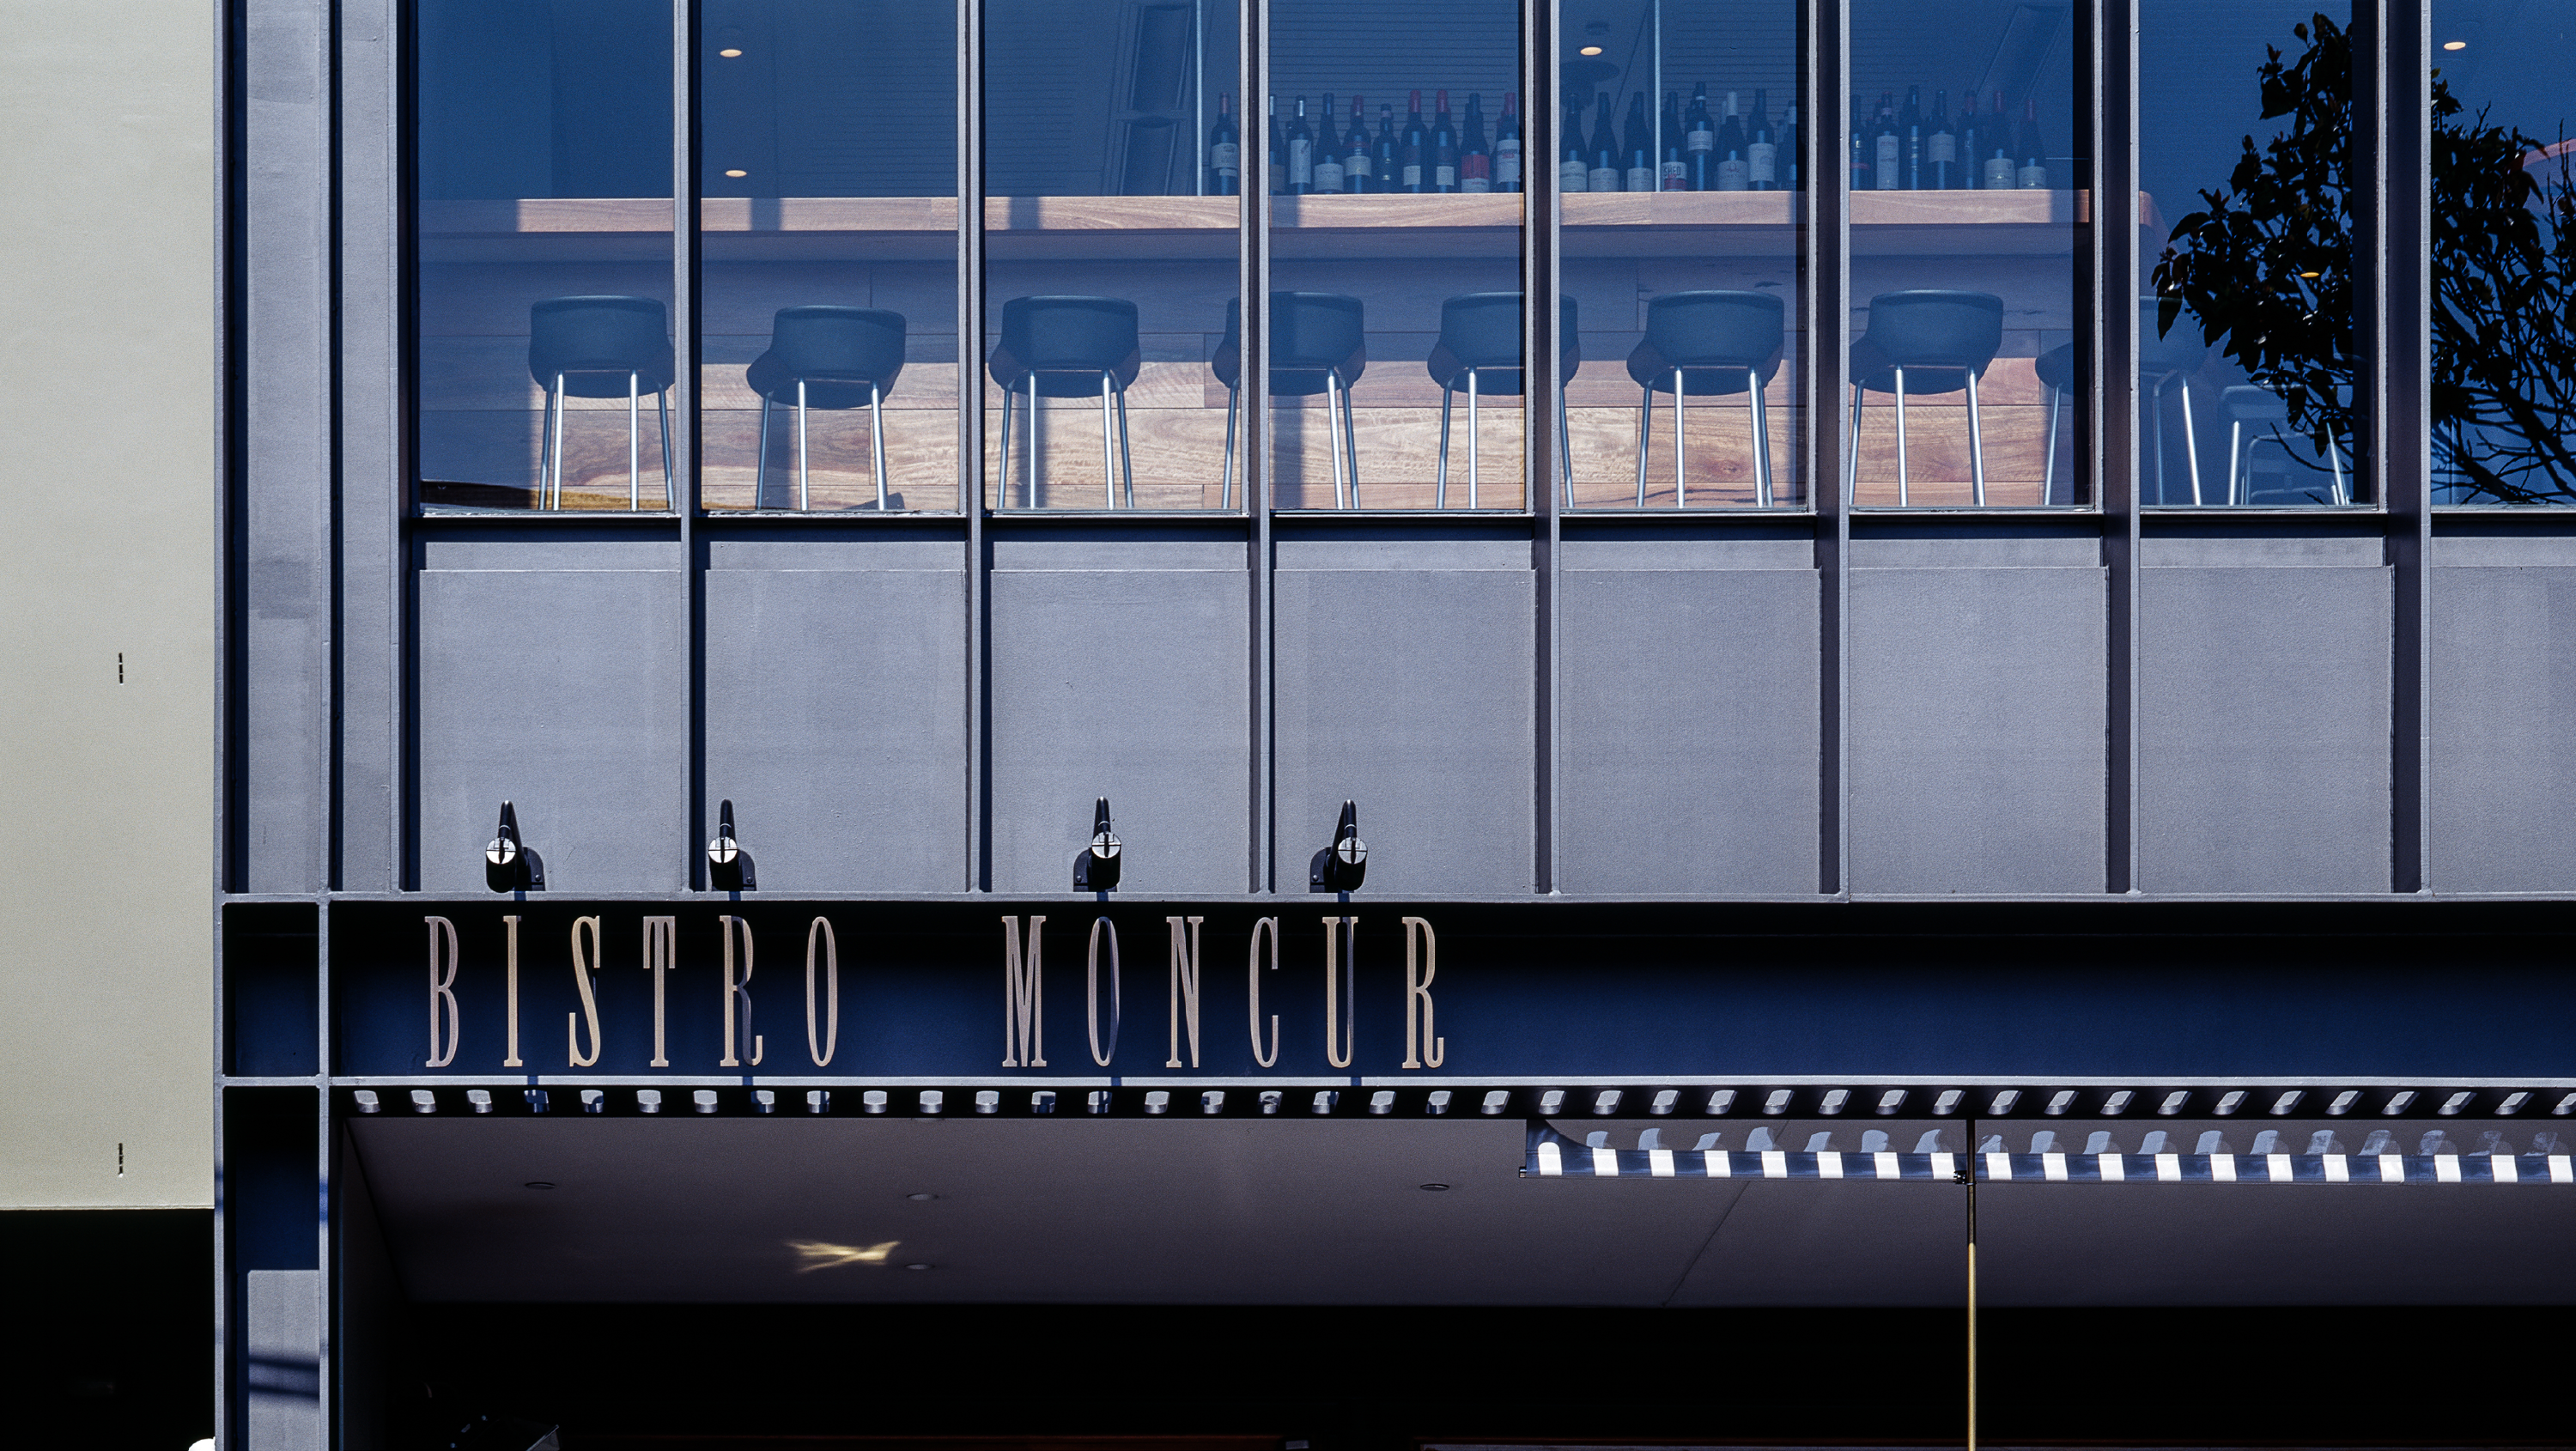 Photograph of the signage of the award-wining Bistro Moncur designed by Tzannes